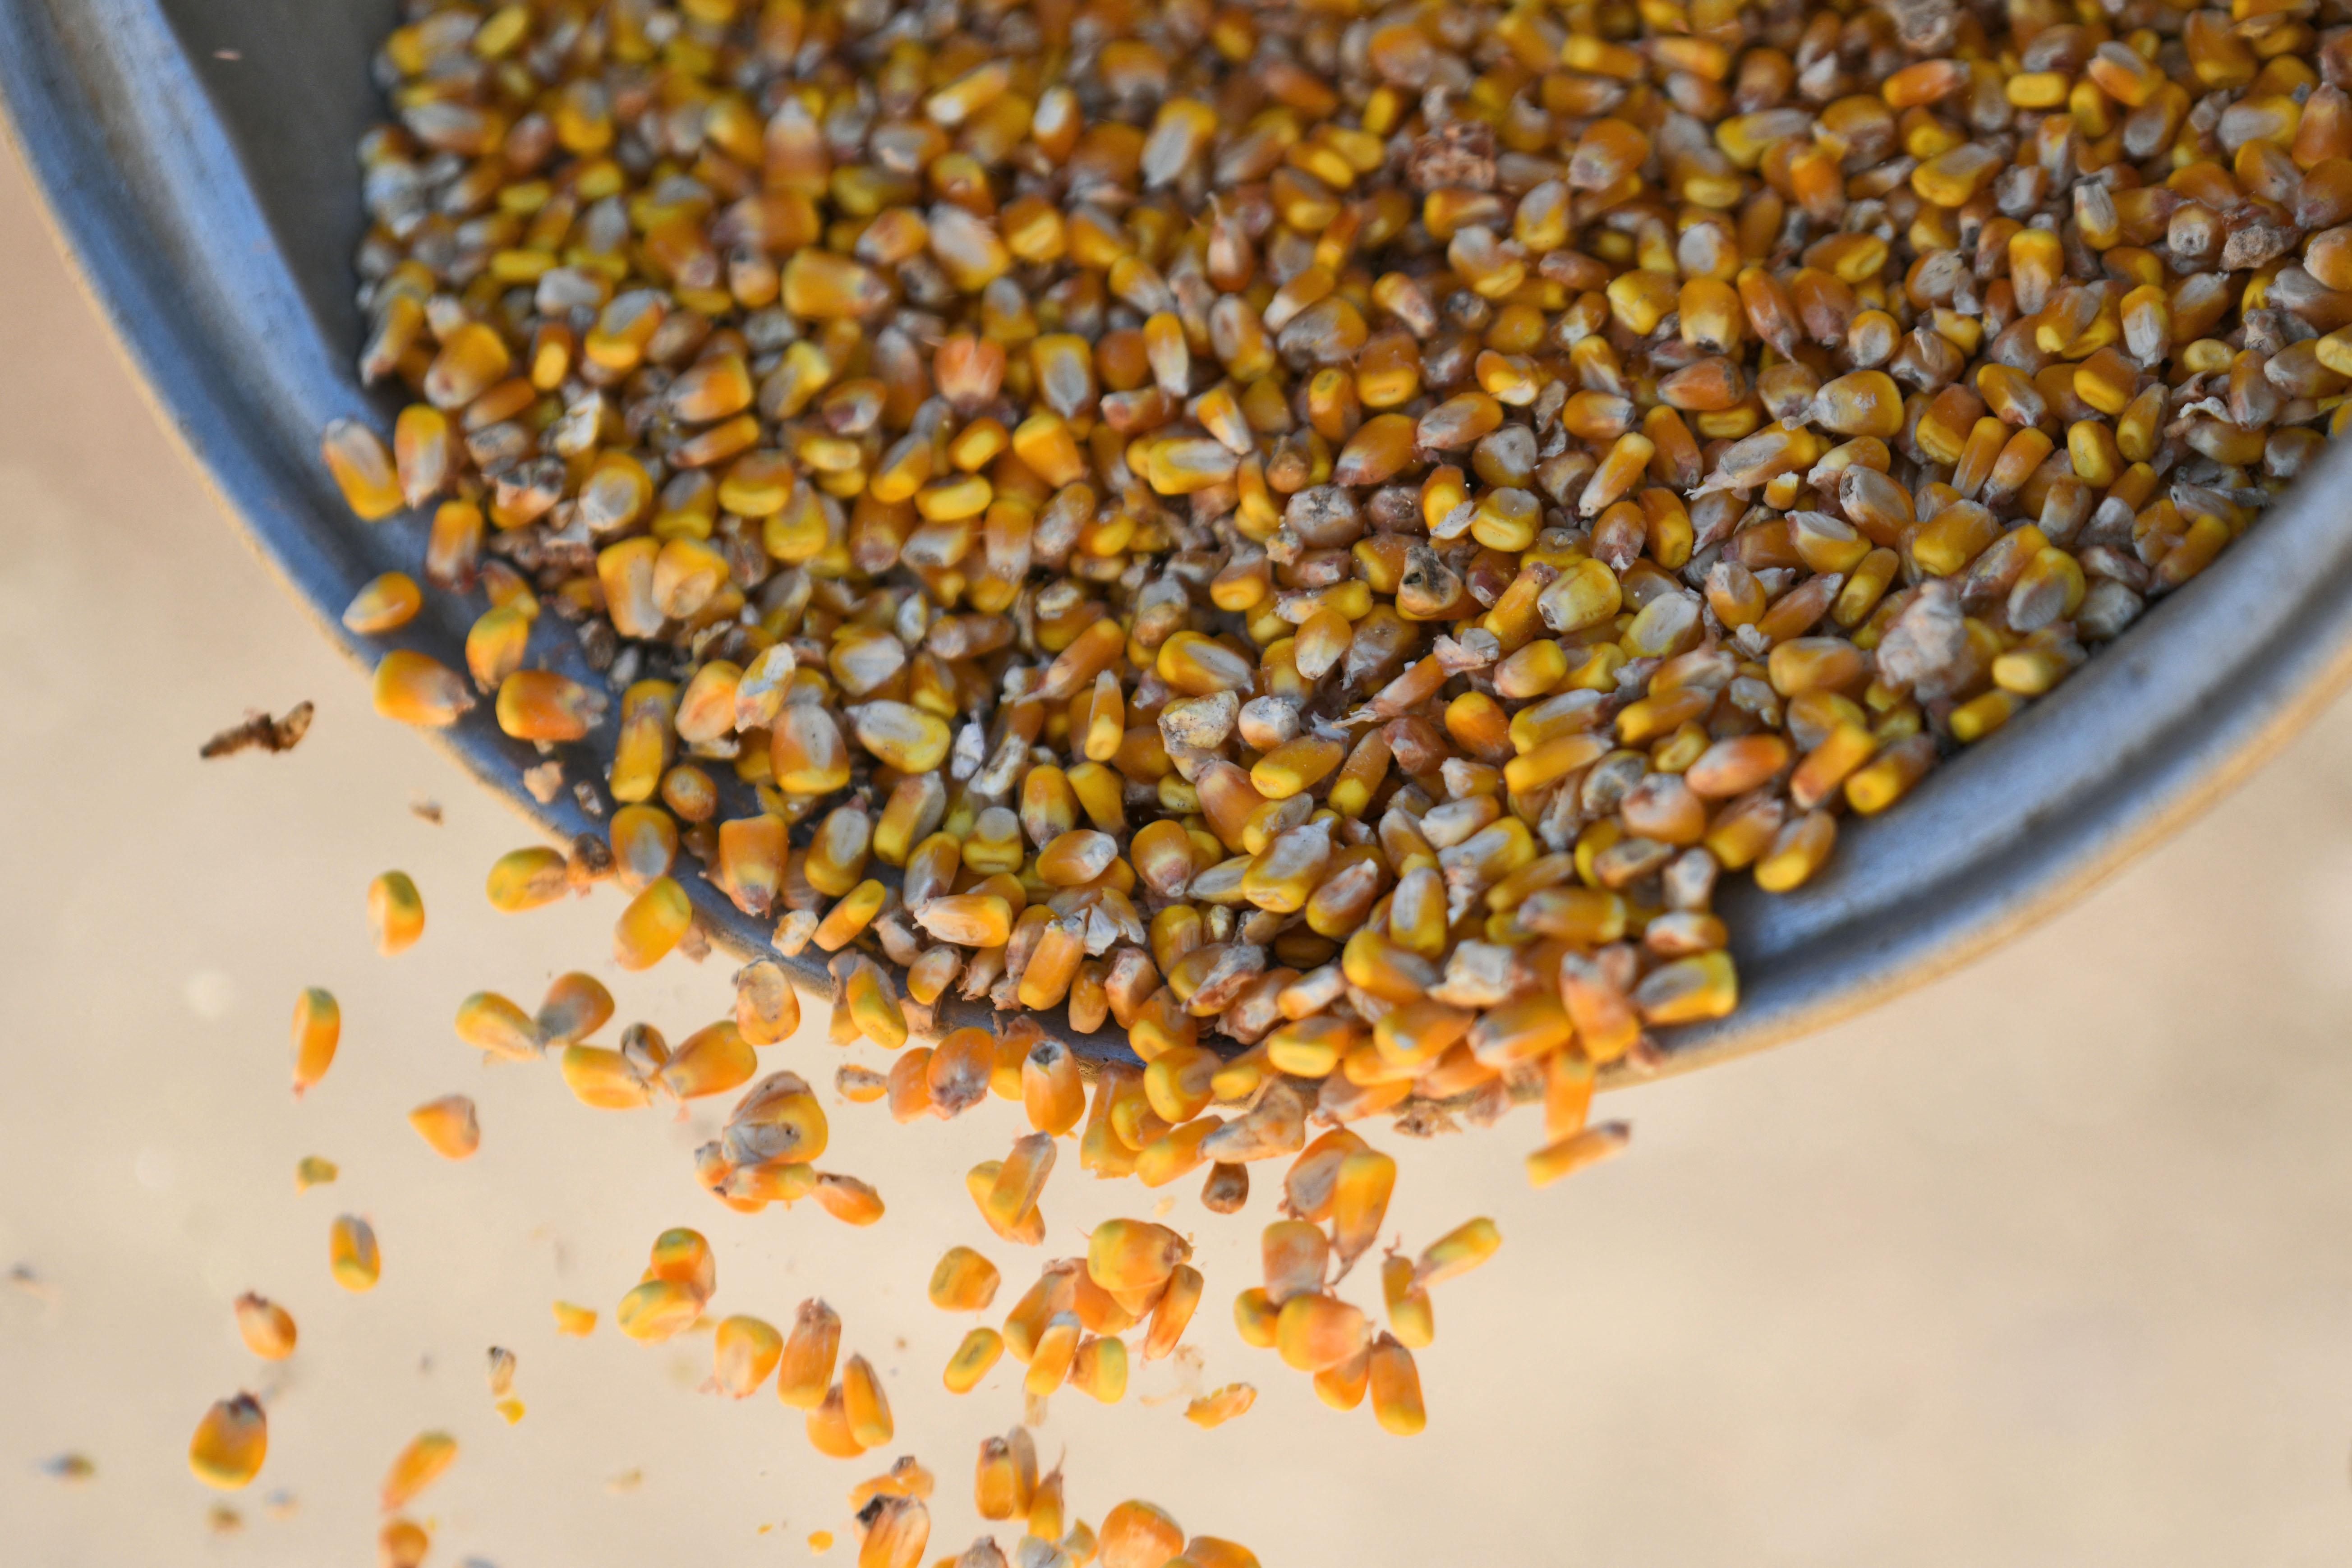 A large metal container full of yellow corn kernels is turned upside down. 